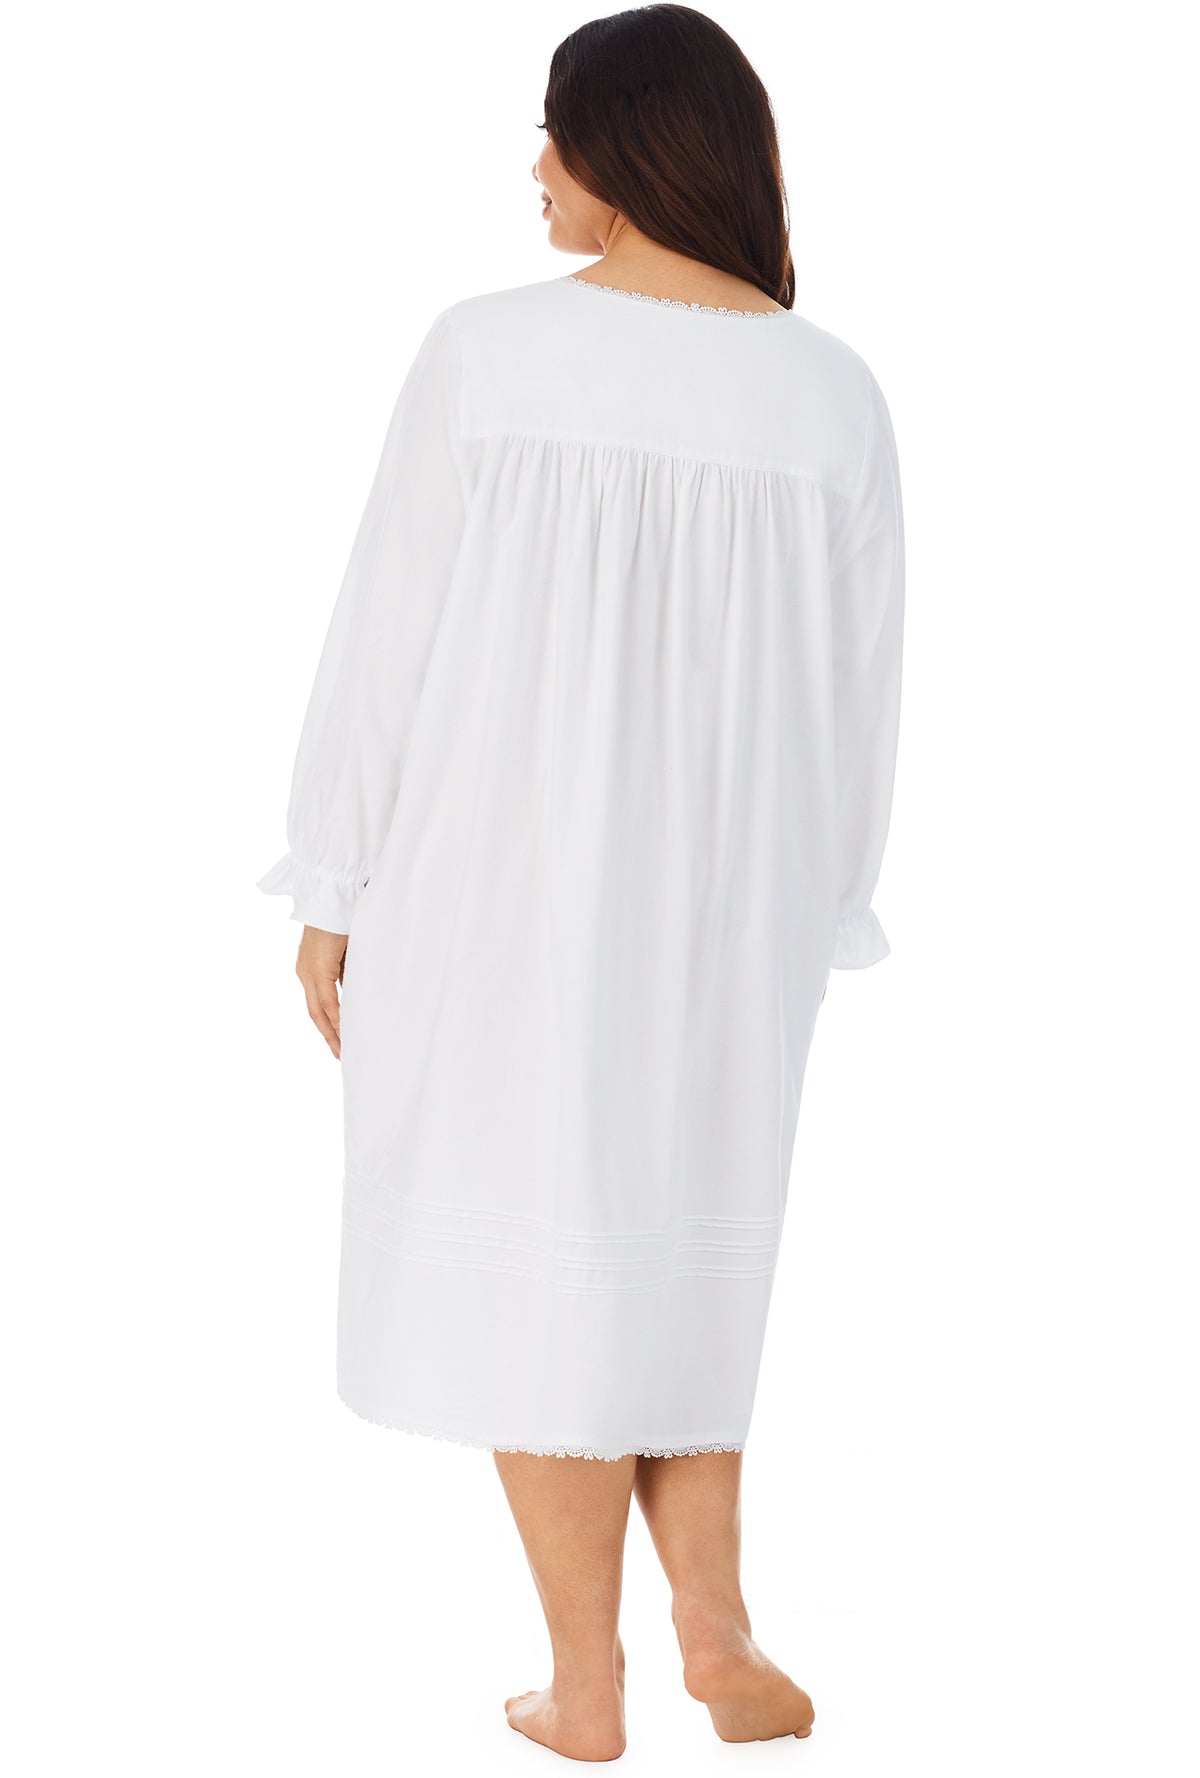 A lady wearing a white long sleeve rayon lightweight flannel waltz nightgown plus.